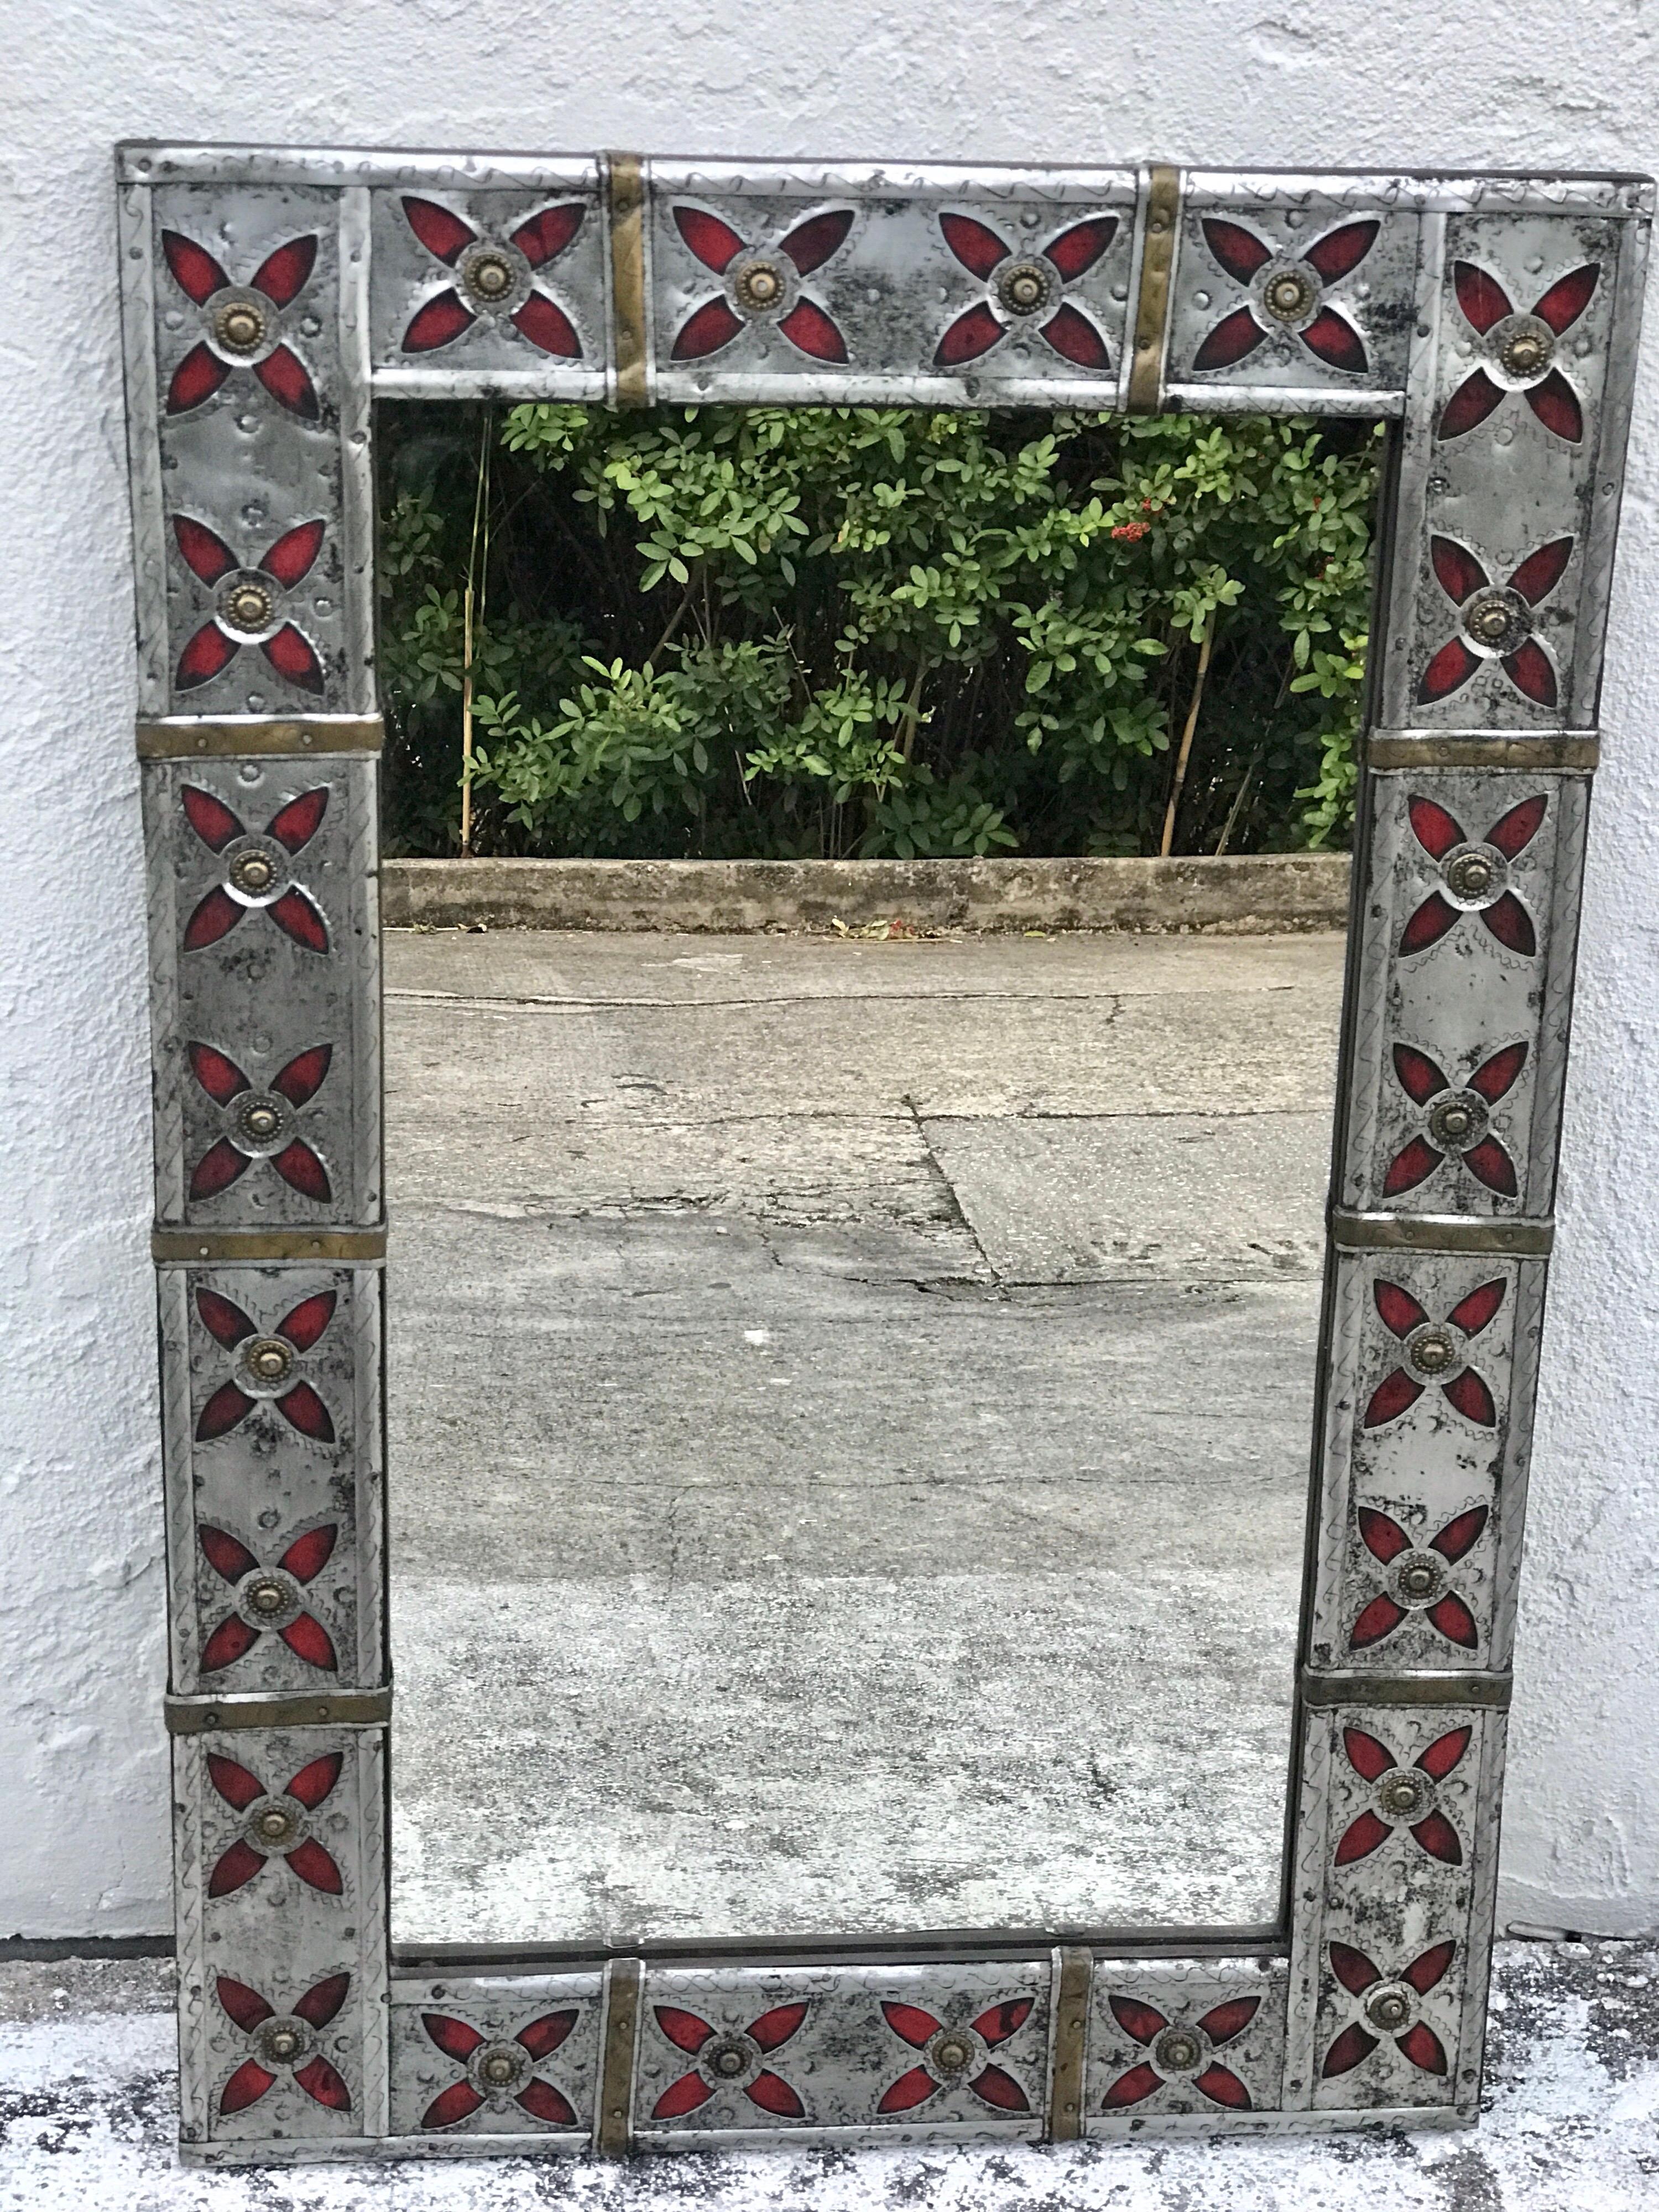 Syrian Pewter, brass and enameled mirror. Of rectangular form with chased pewter and brass frame, with a continuous surround of red enameled 